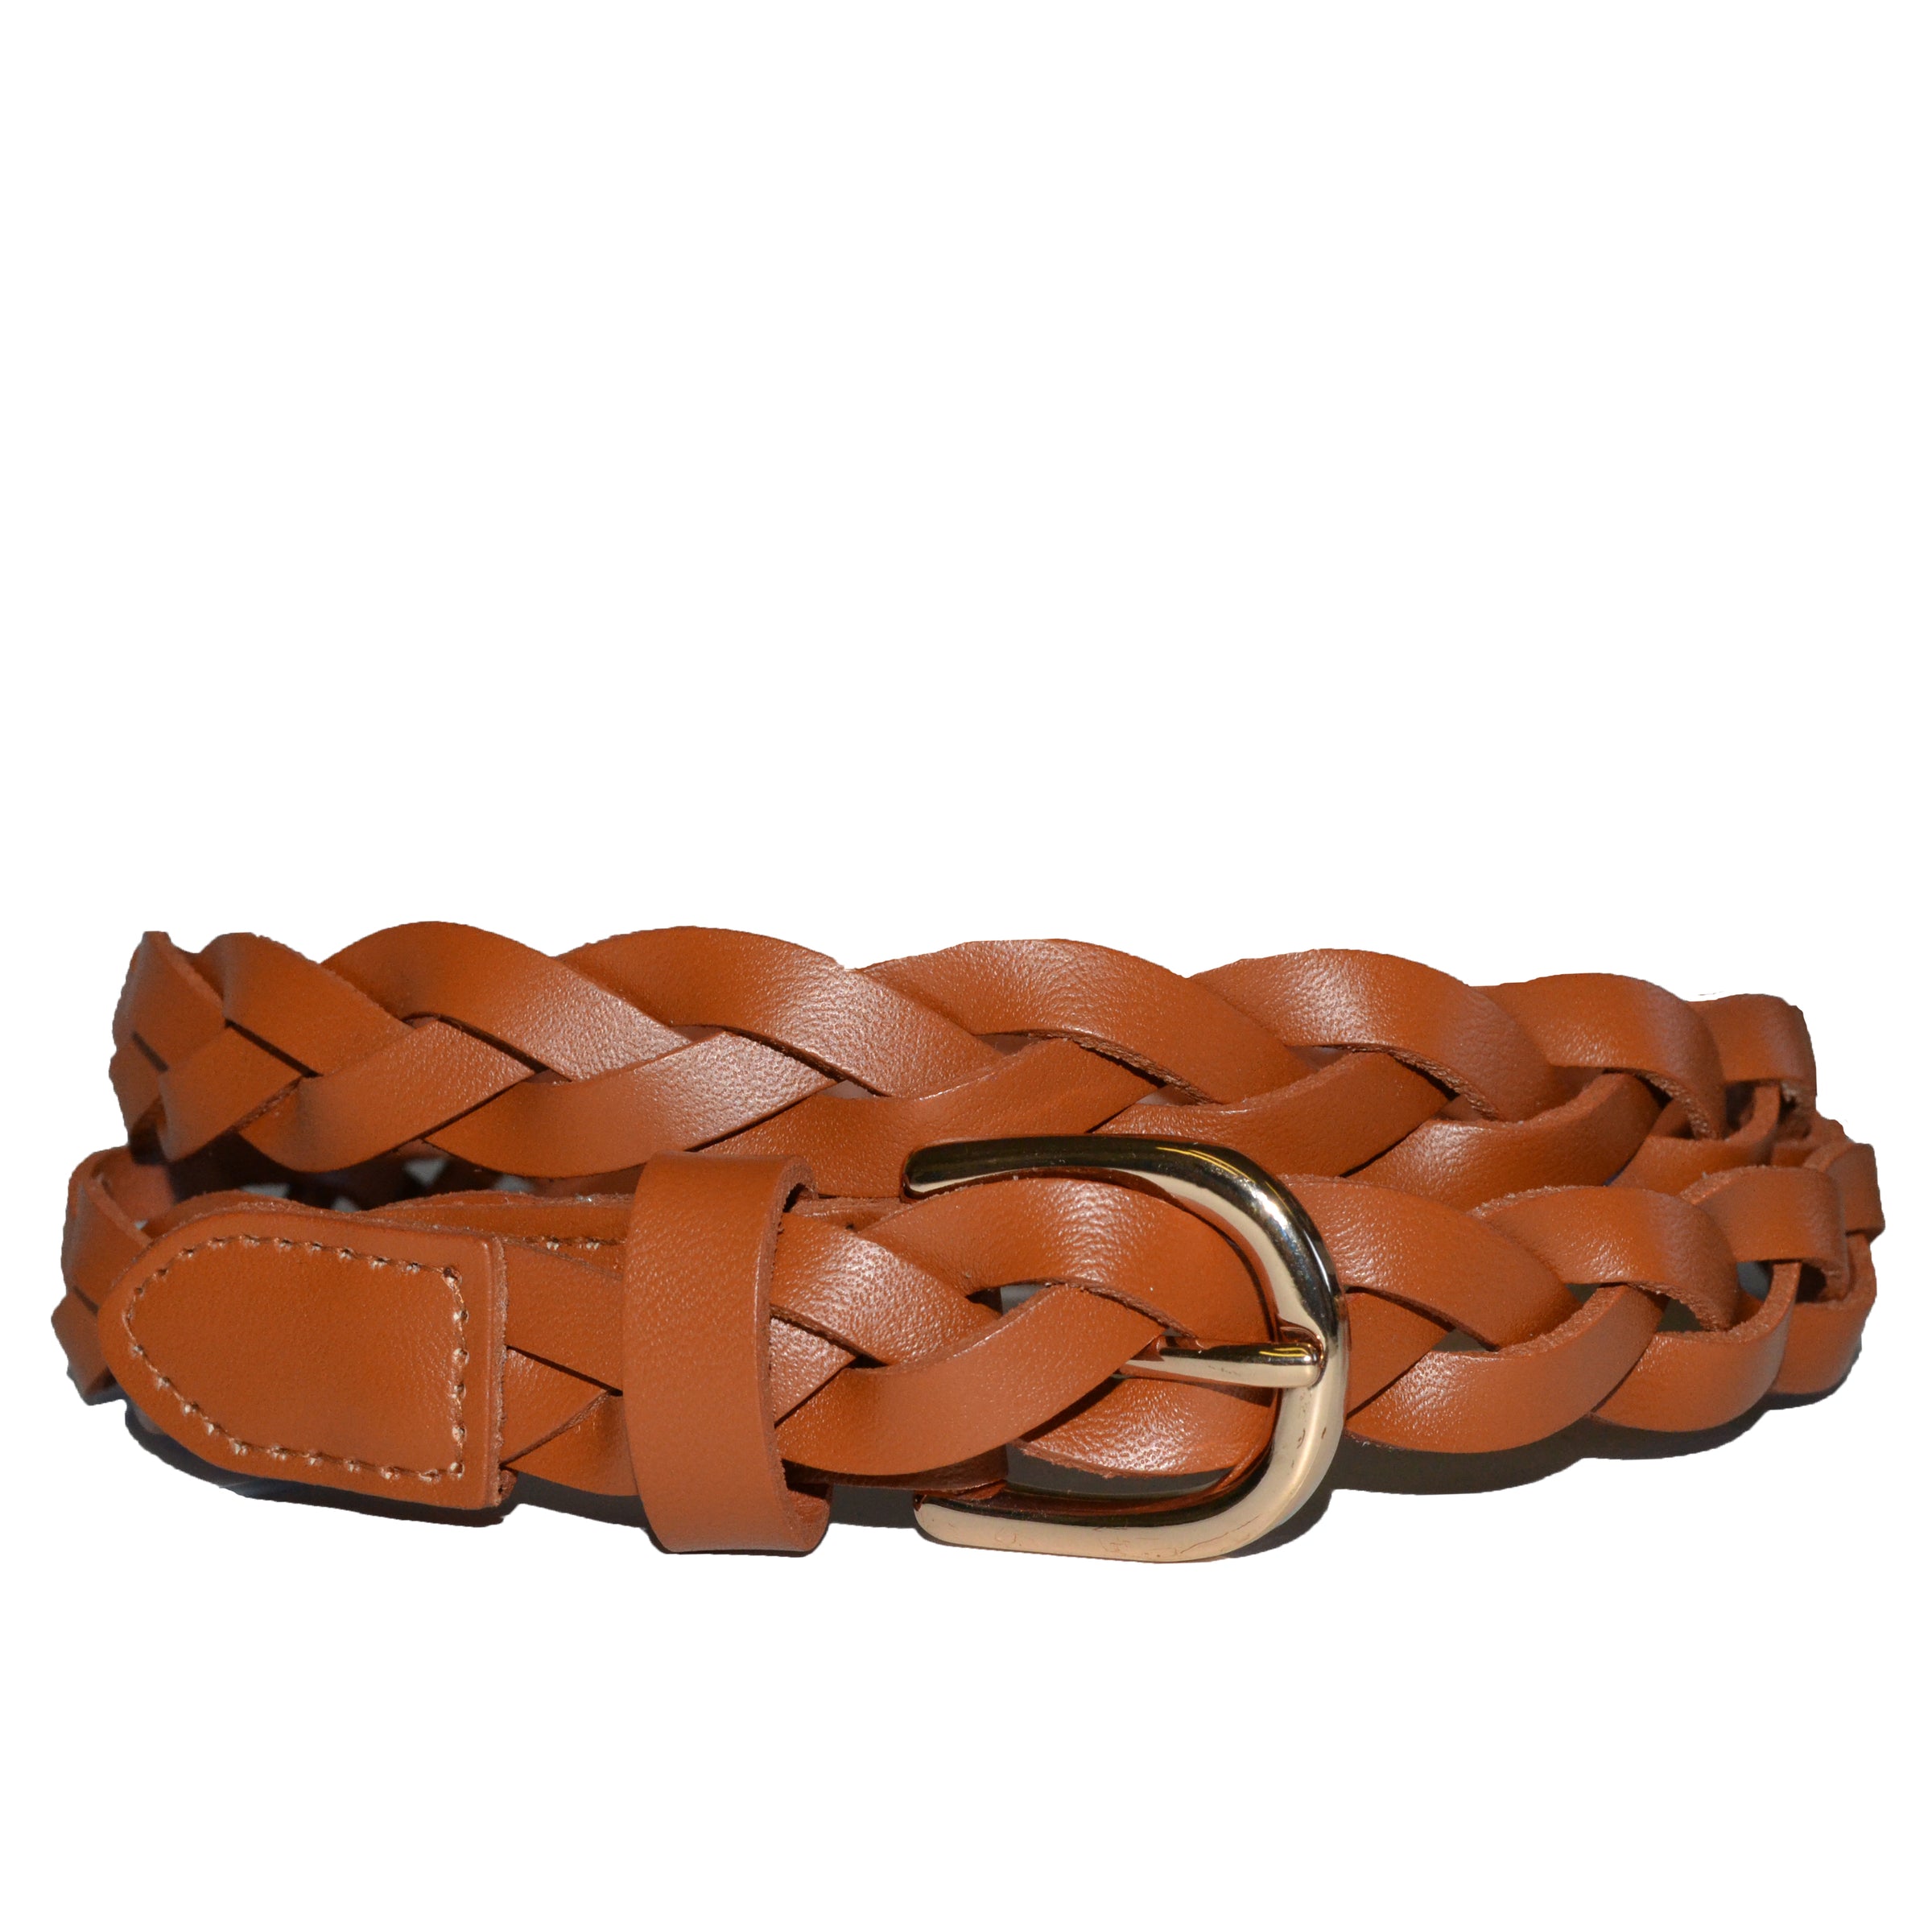 WAVERLY - Womens Tan Leather Plaited Belt with Gold Buckle Belts Addison Road